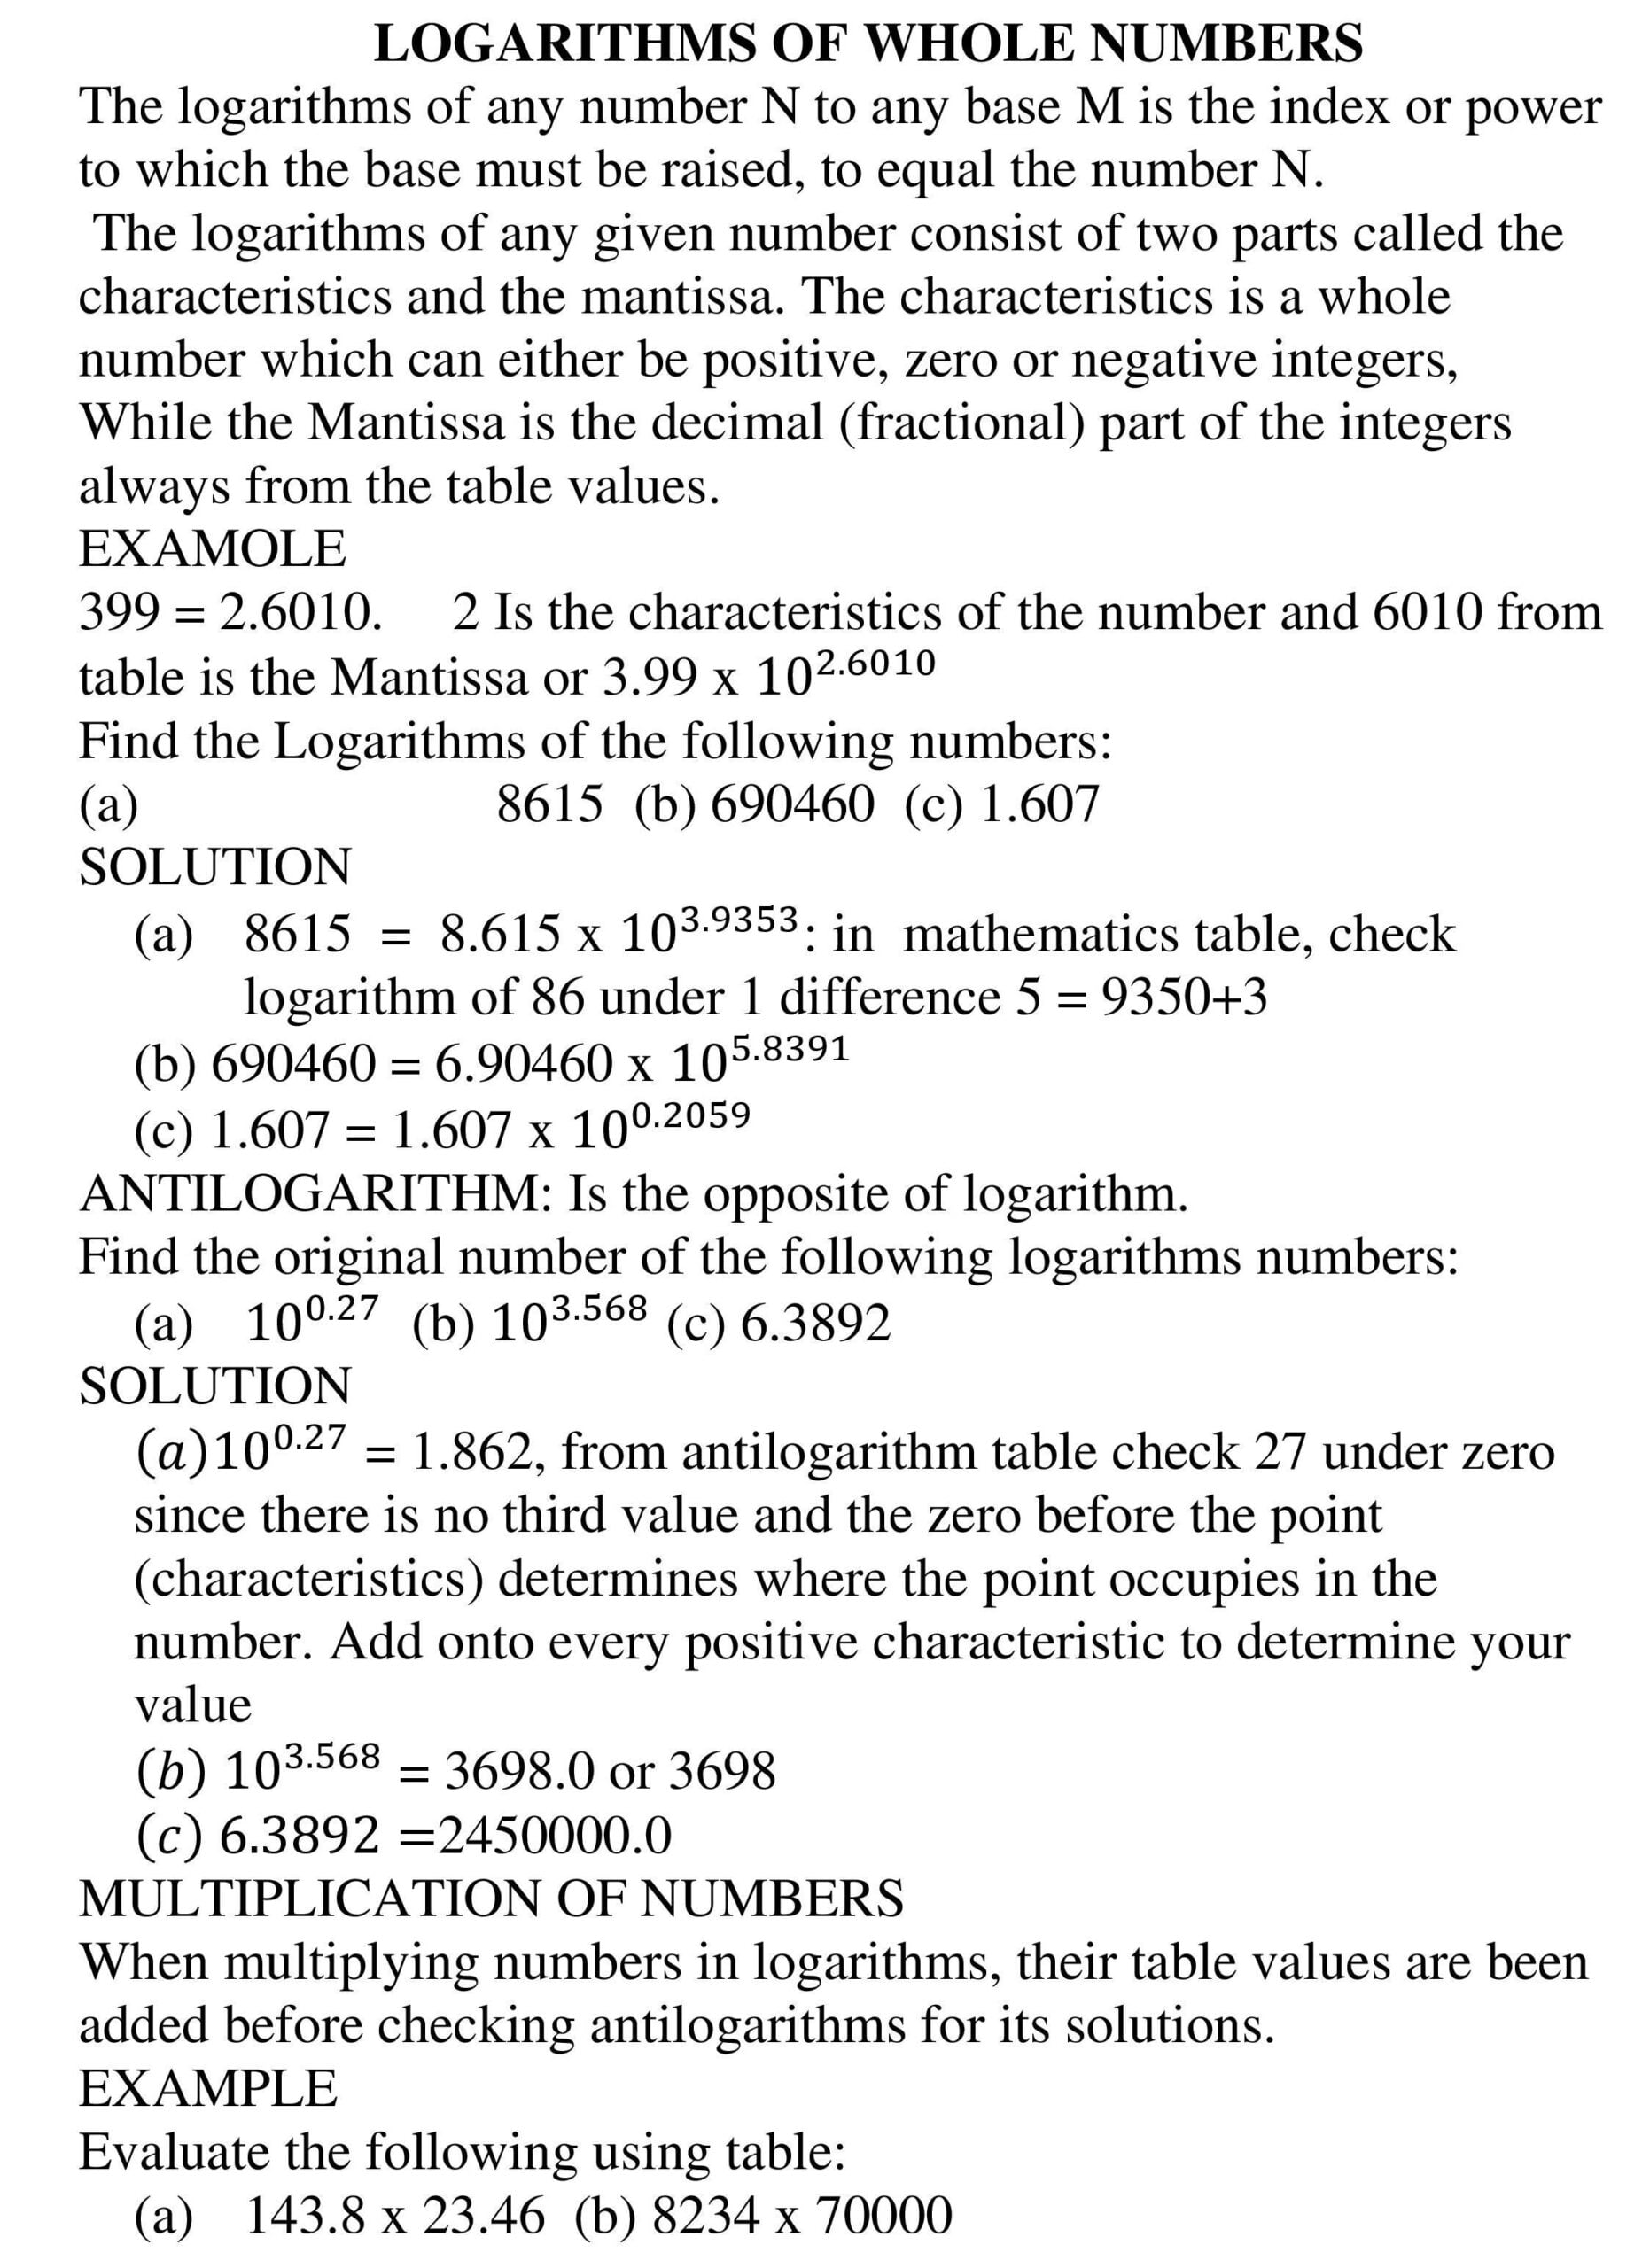 LOGARITHMS OF WHOLE NUMBERS_1